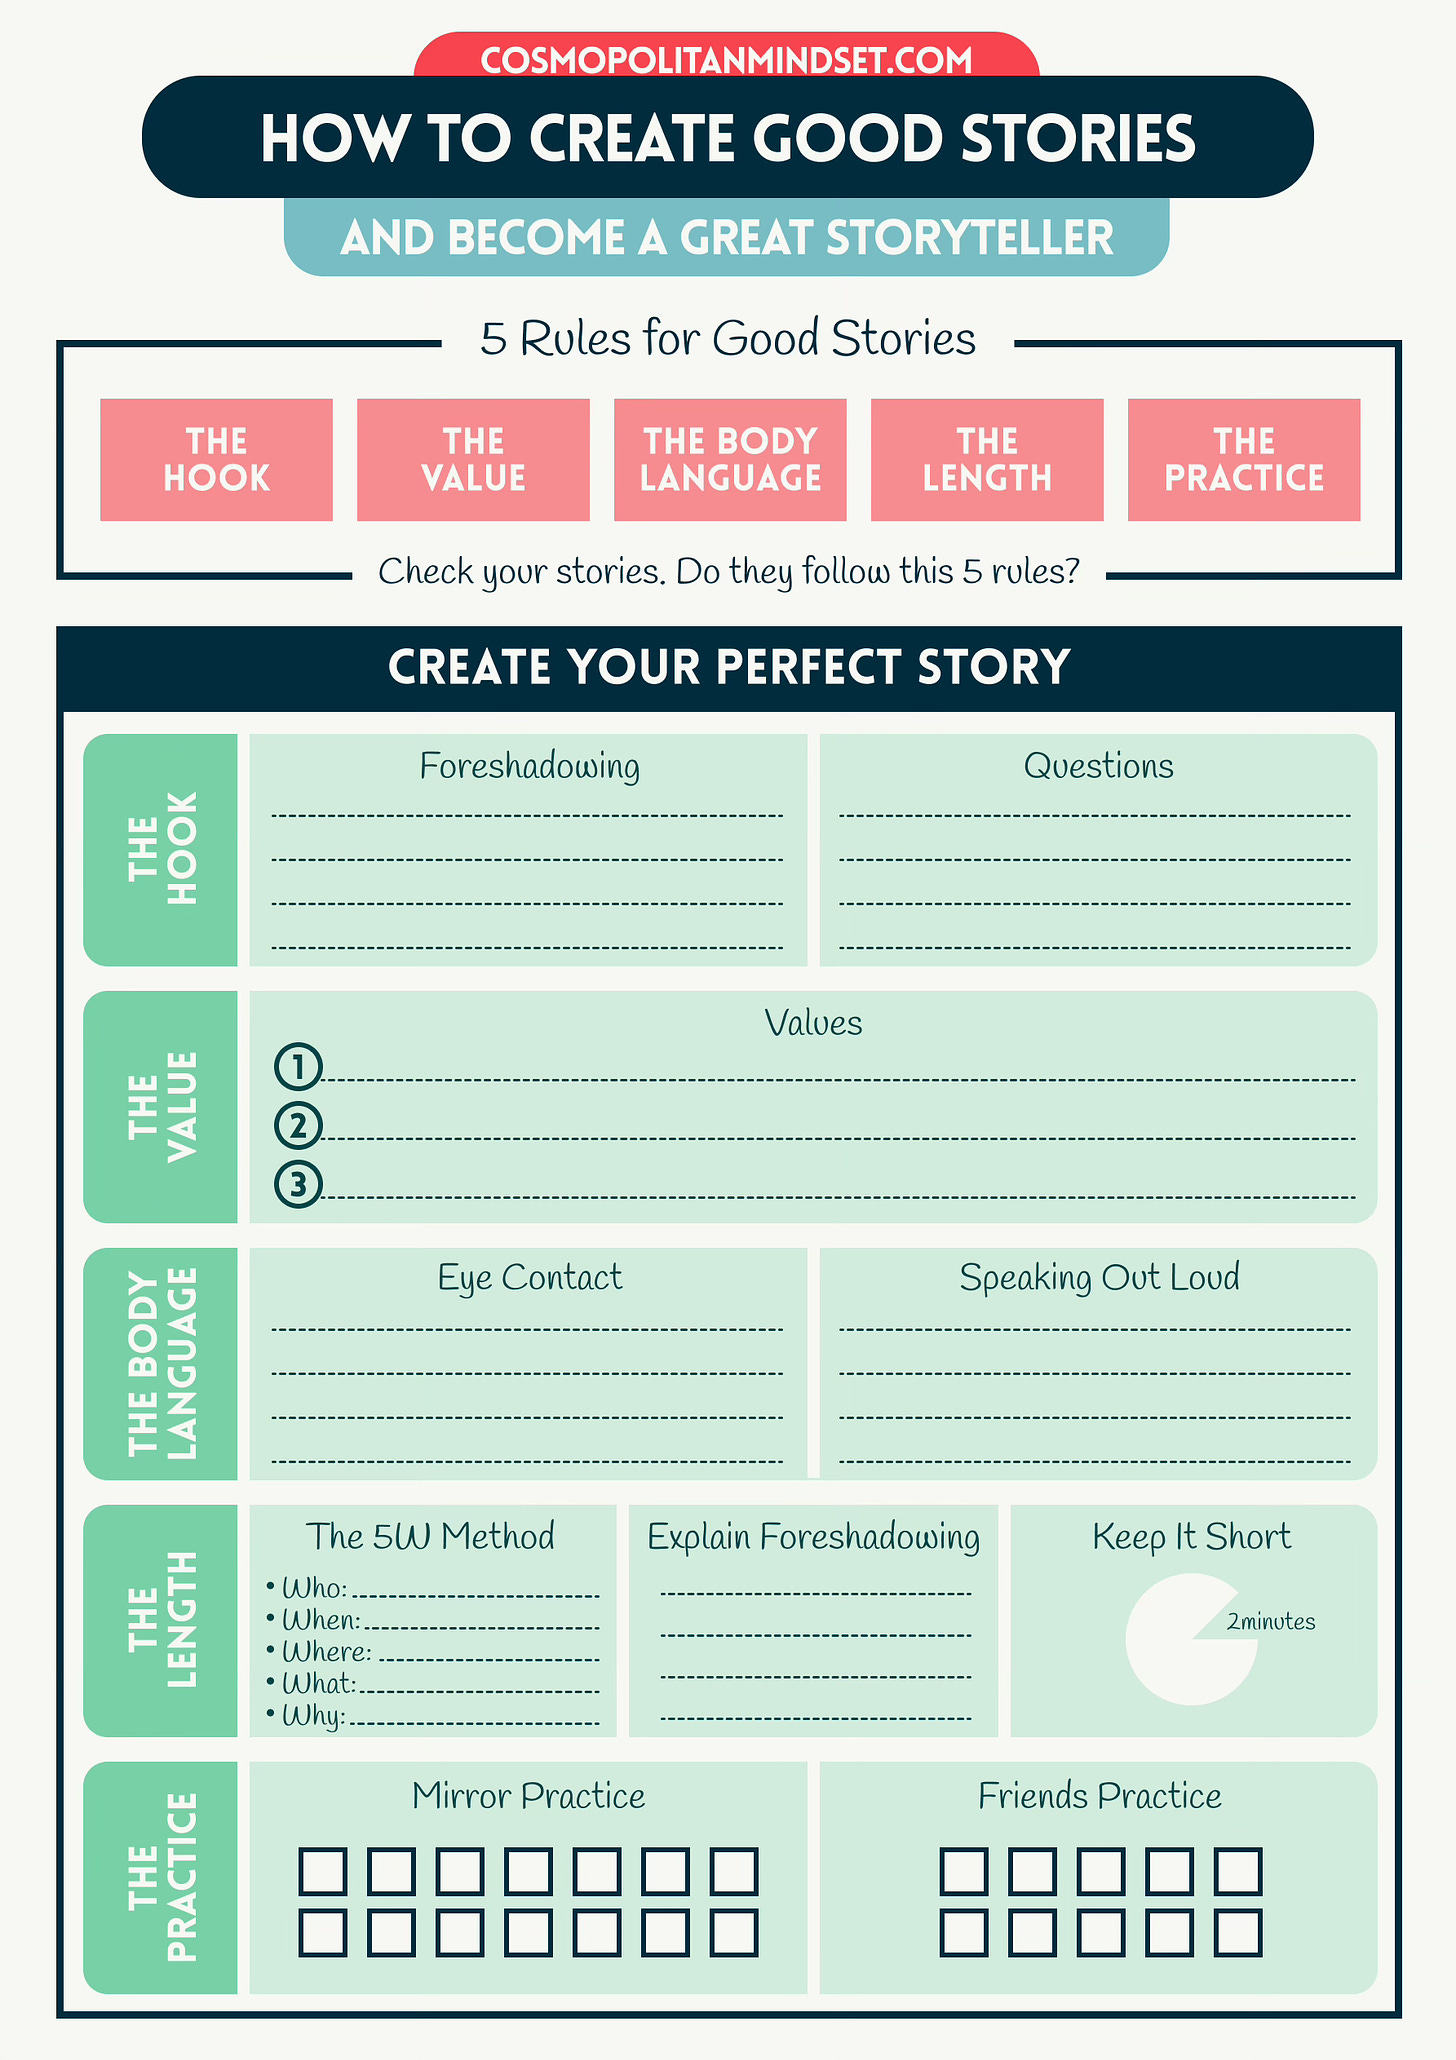 How to Create Good Stories and Become a Good Storyteller